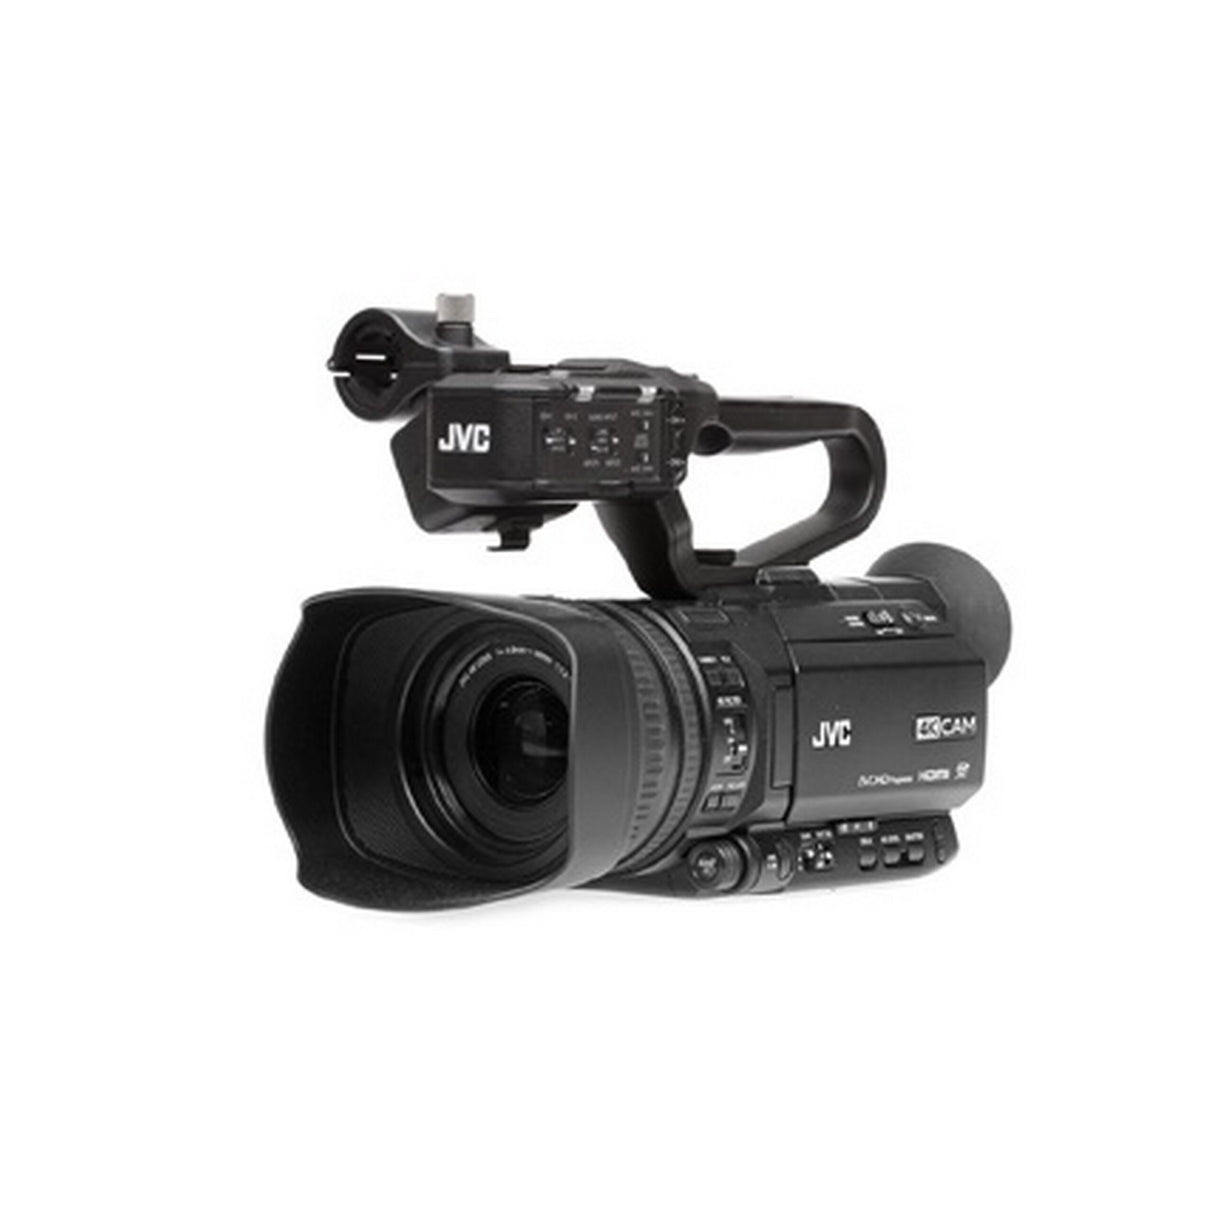 JVC GY-HM250U 4K Compact Handheld Camcorder with Integrated 12x Lens